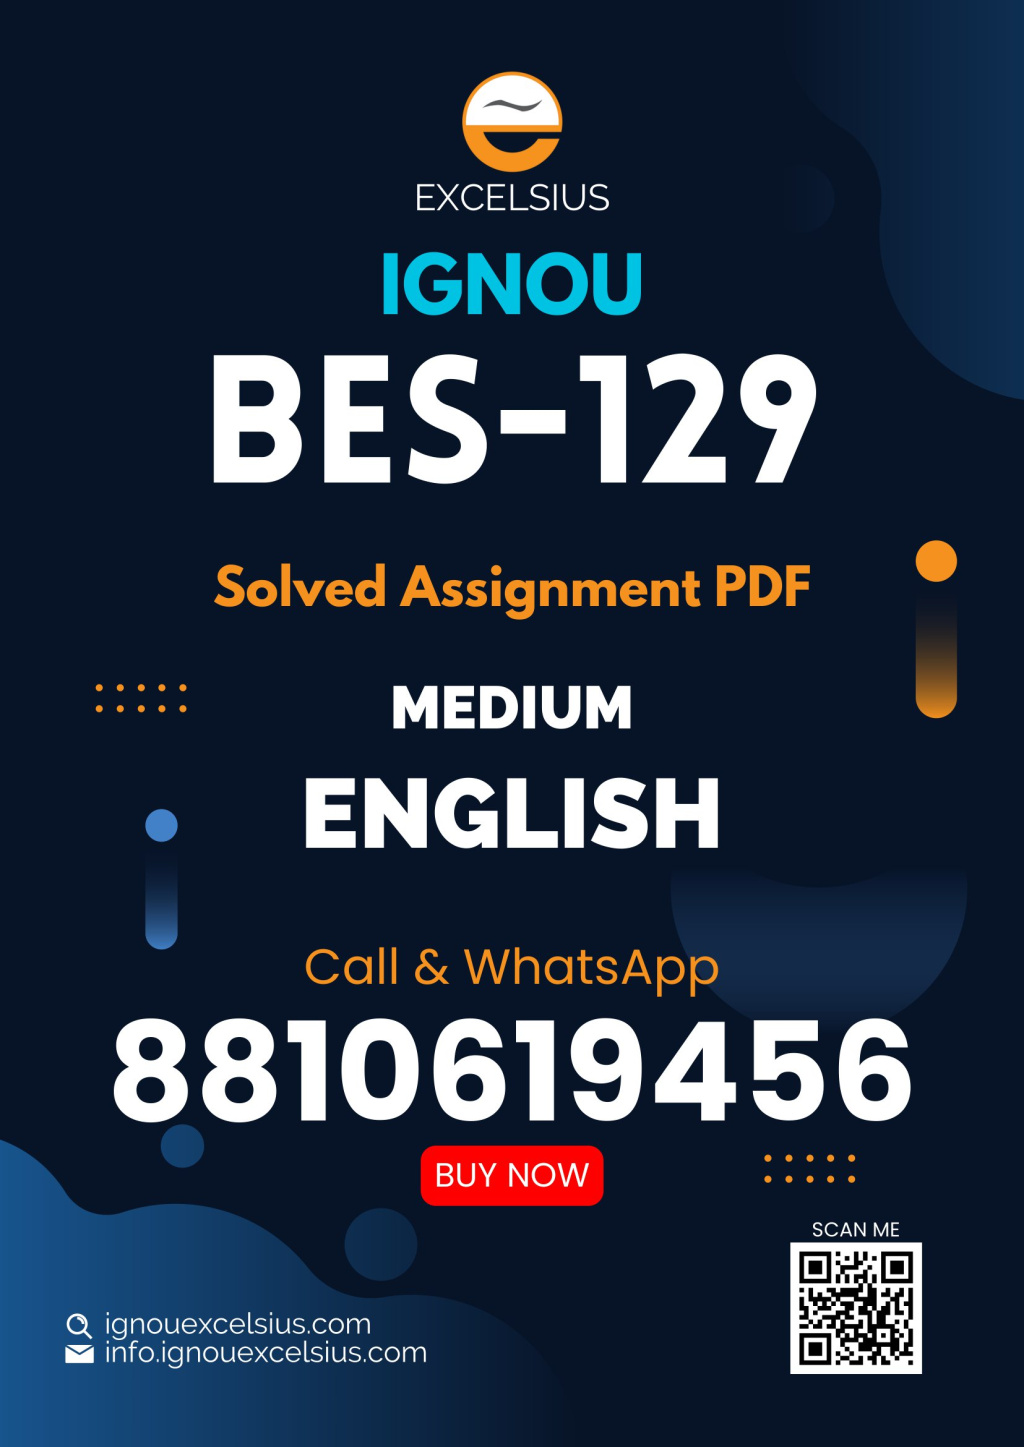 IGNOU BES-129 - Gender, School and Society, Latest Solved Assignment-January 2022